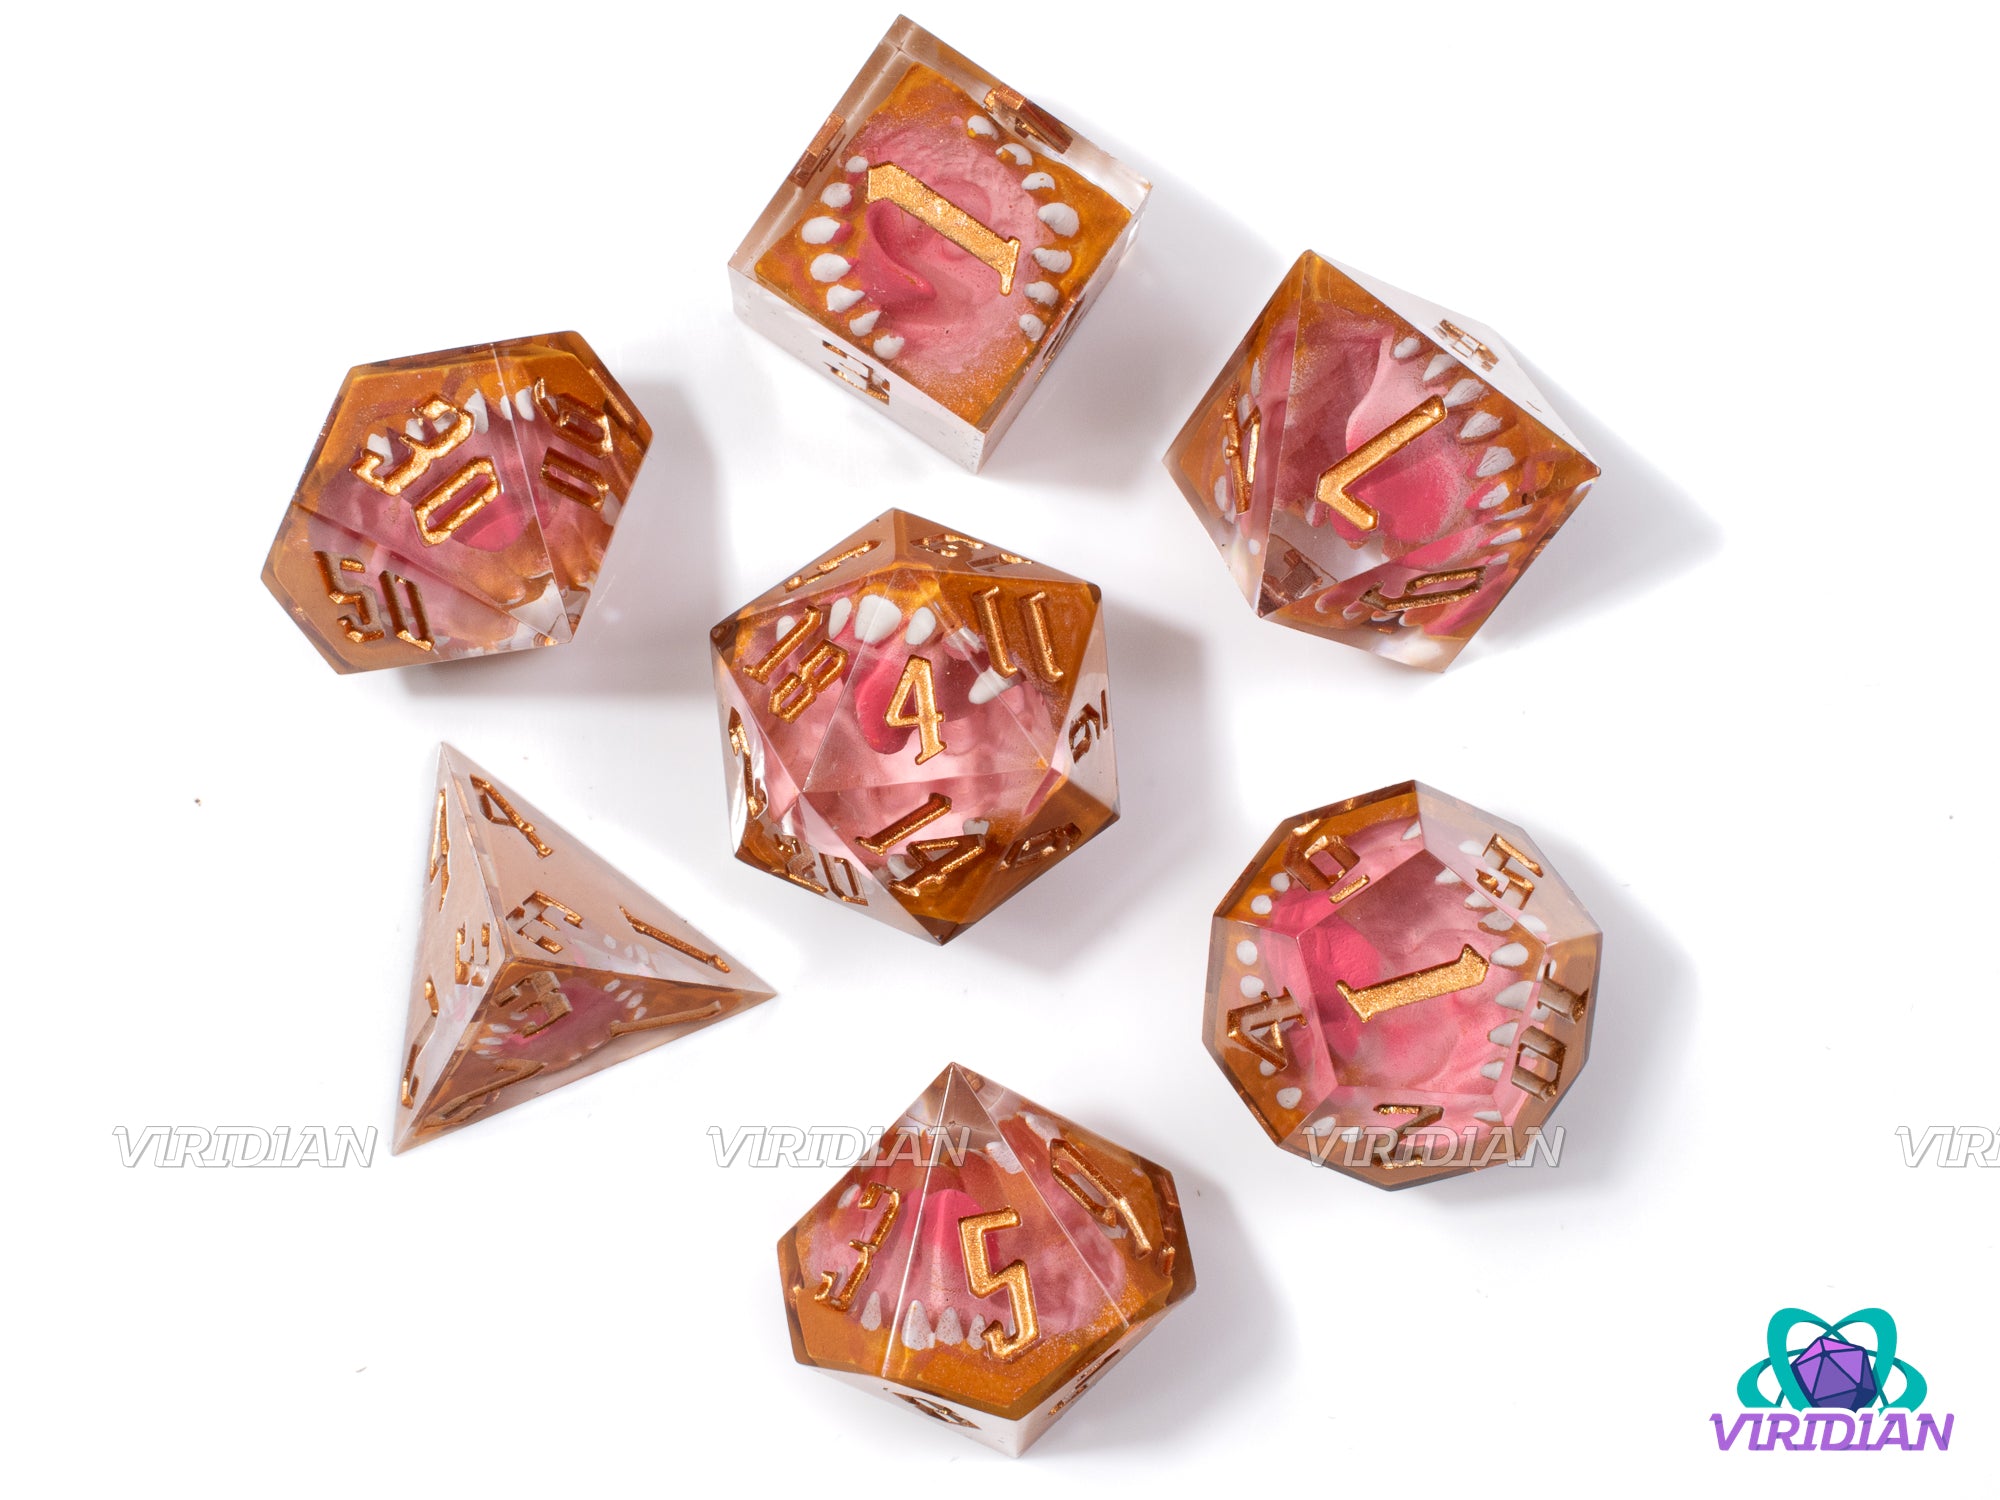 Mimic's Bite | Pink & Red, Transparent, Gold, Sharp-Edged, Mimic Teeth and Mouth | Resin Dice Set (7)